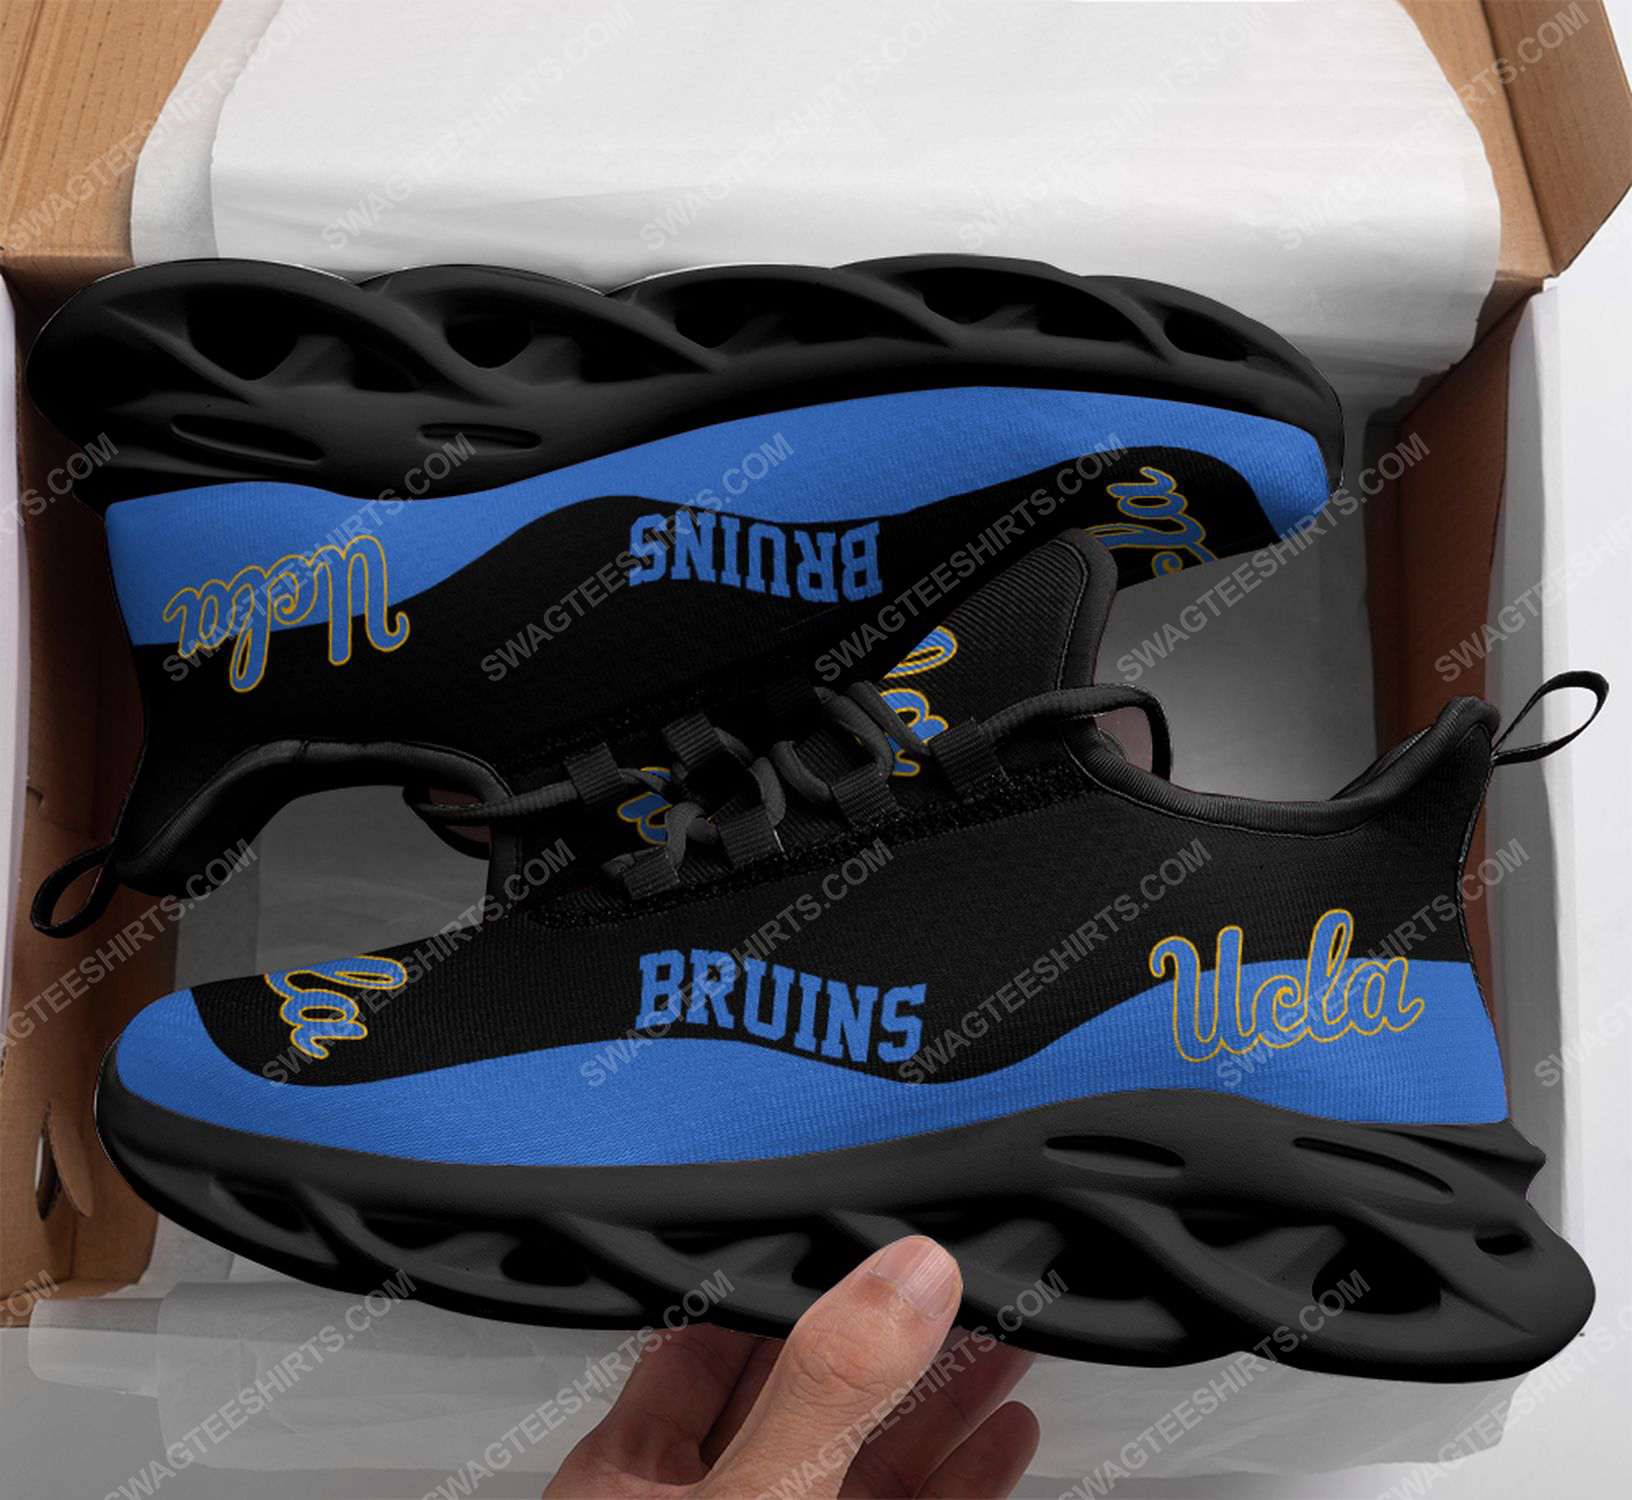 The ucla bruins football team max soul shoes 3